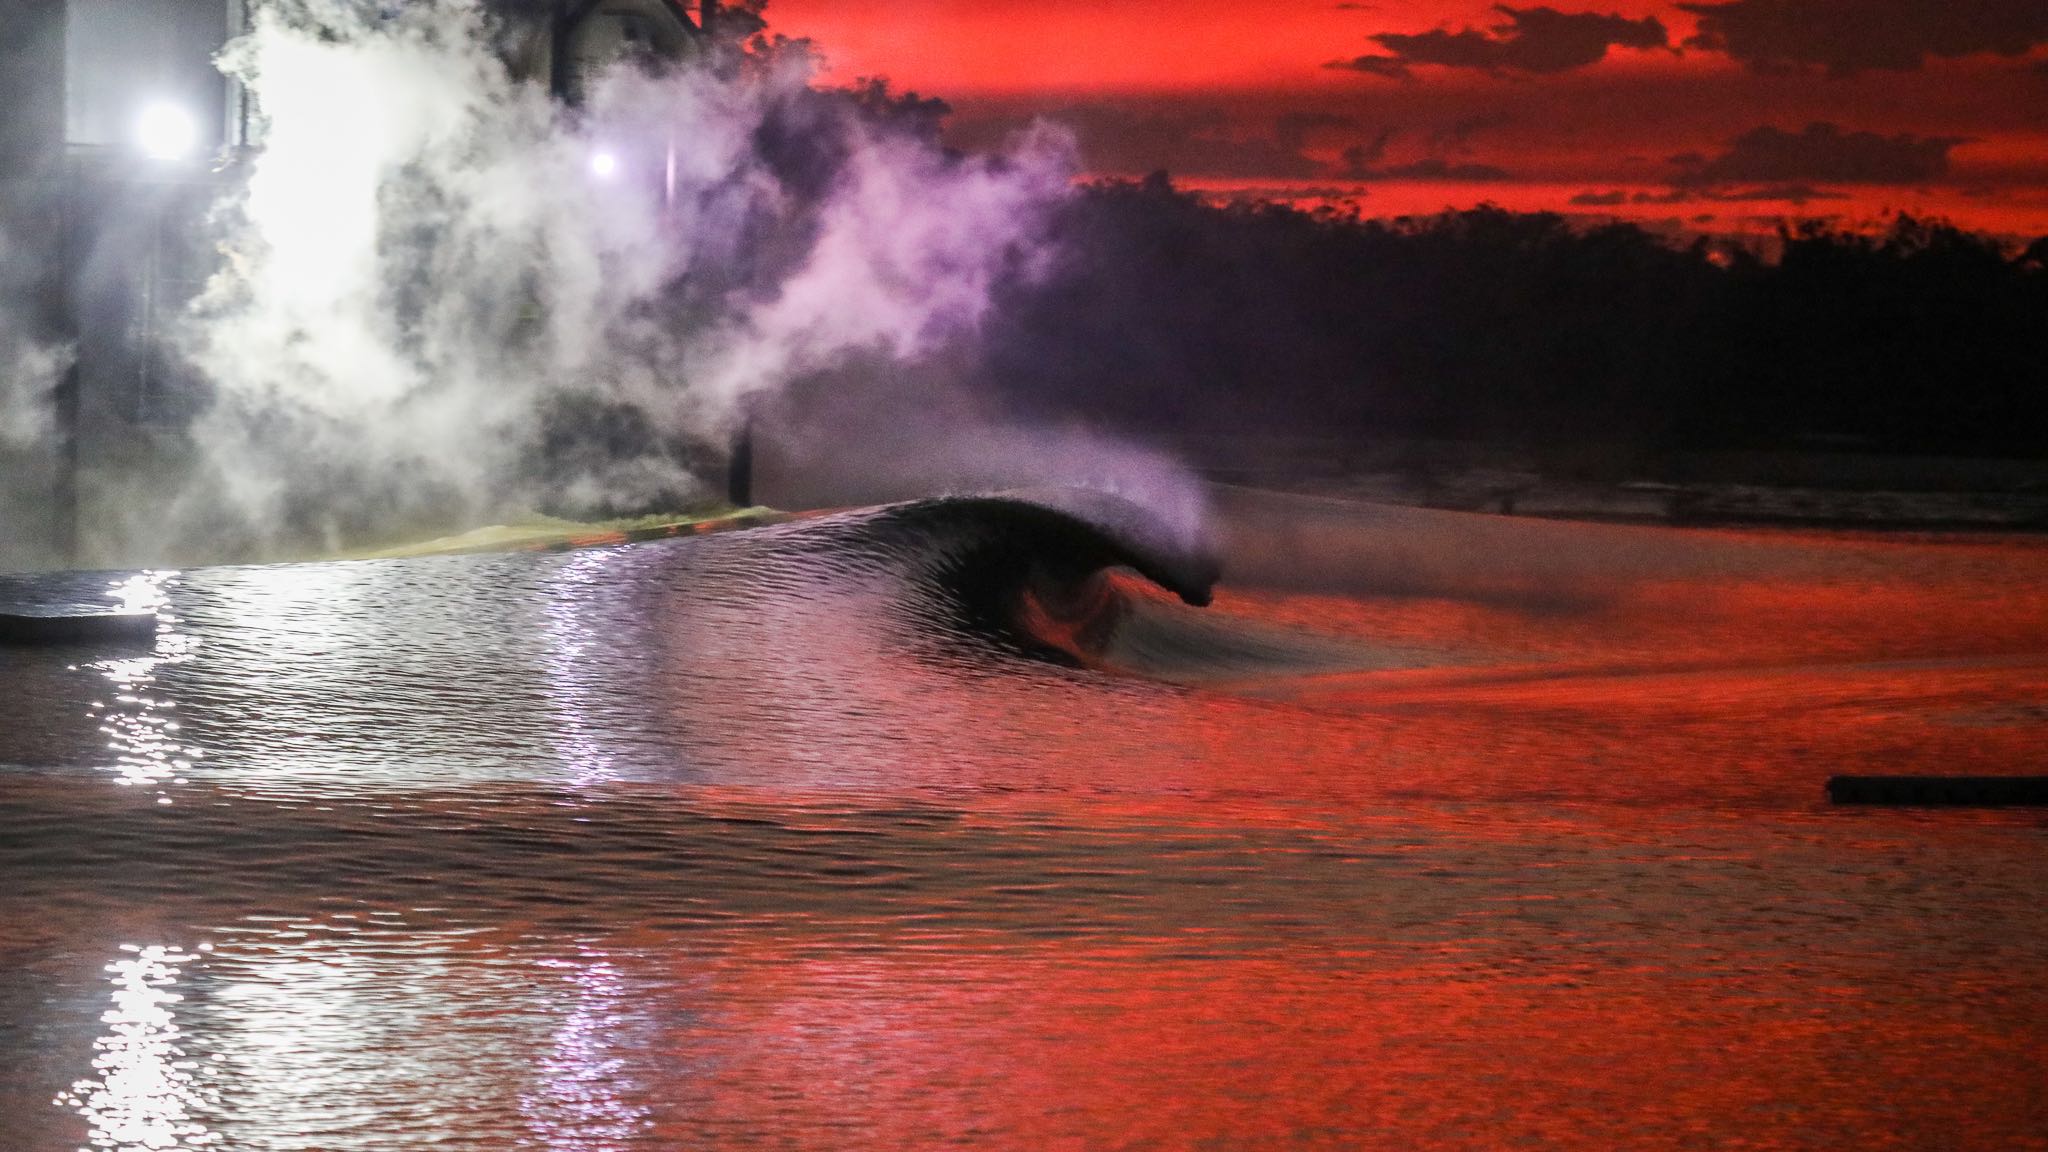 Surf Lakes wave pool in red light